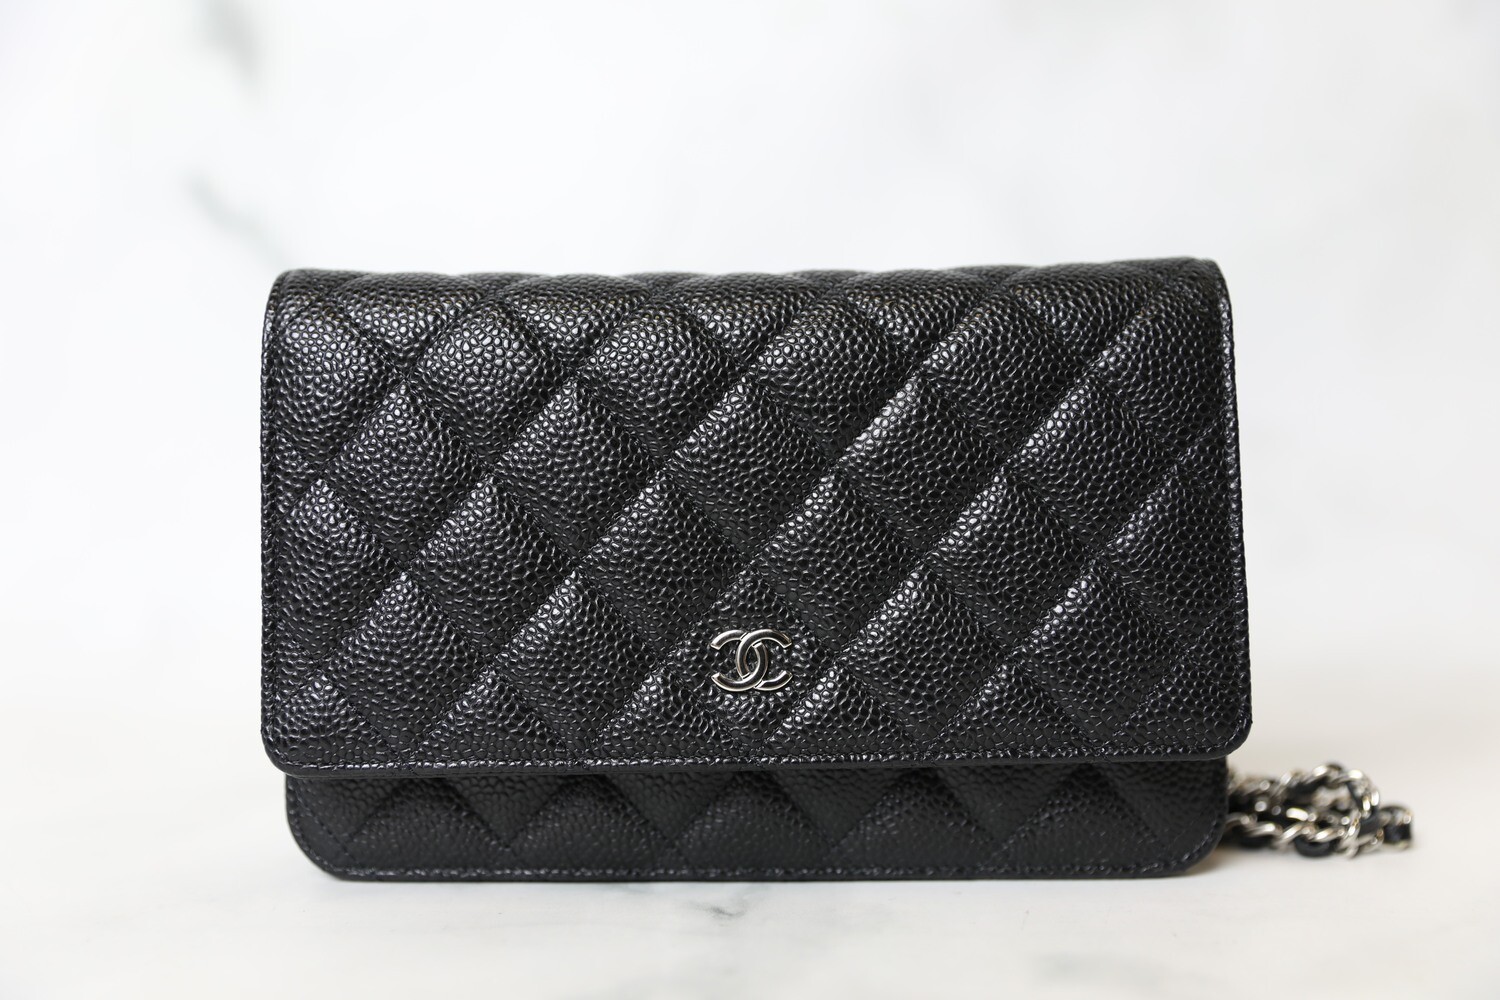 Chanel WOC Wallet on Chain in Black Lambskin with Silver Hardware - SOLD